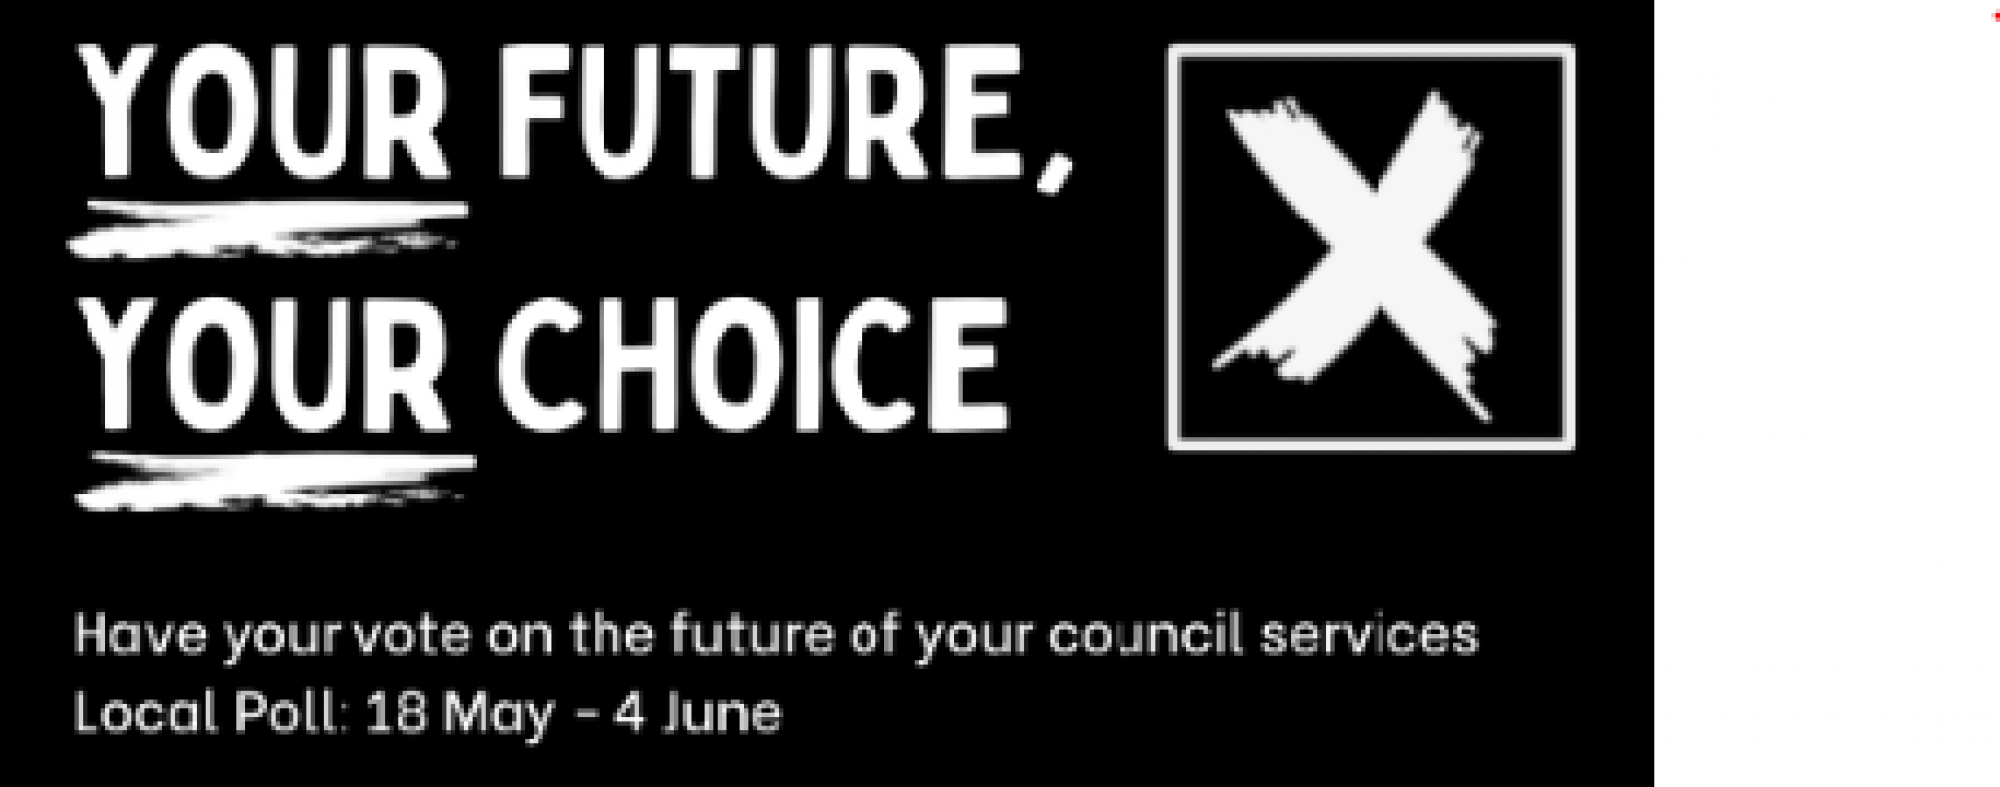 Local poll on future of local government in Somerset goes live this week